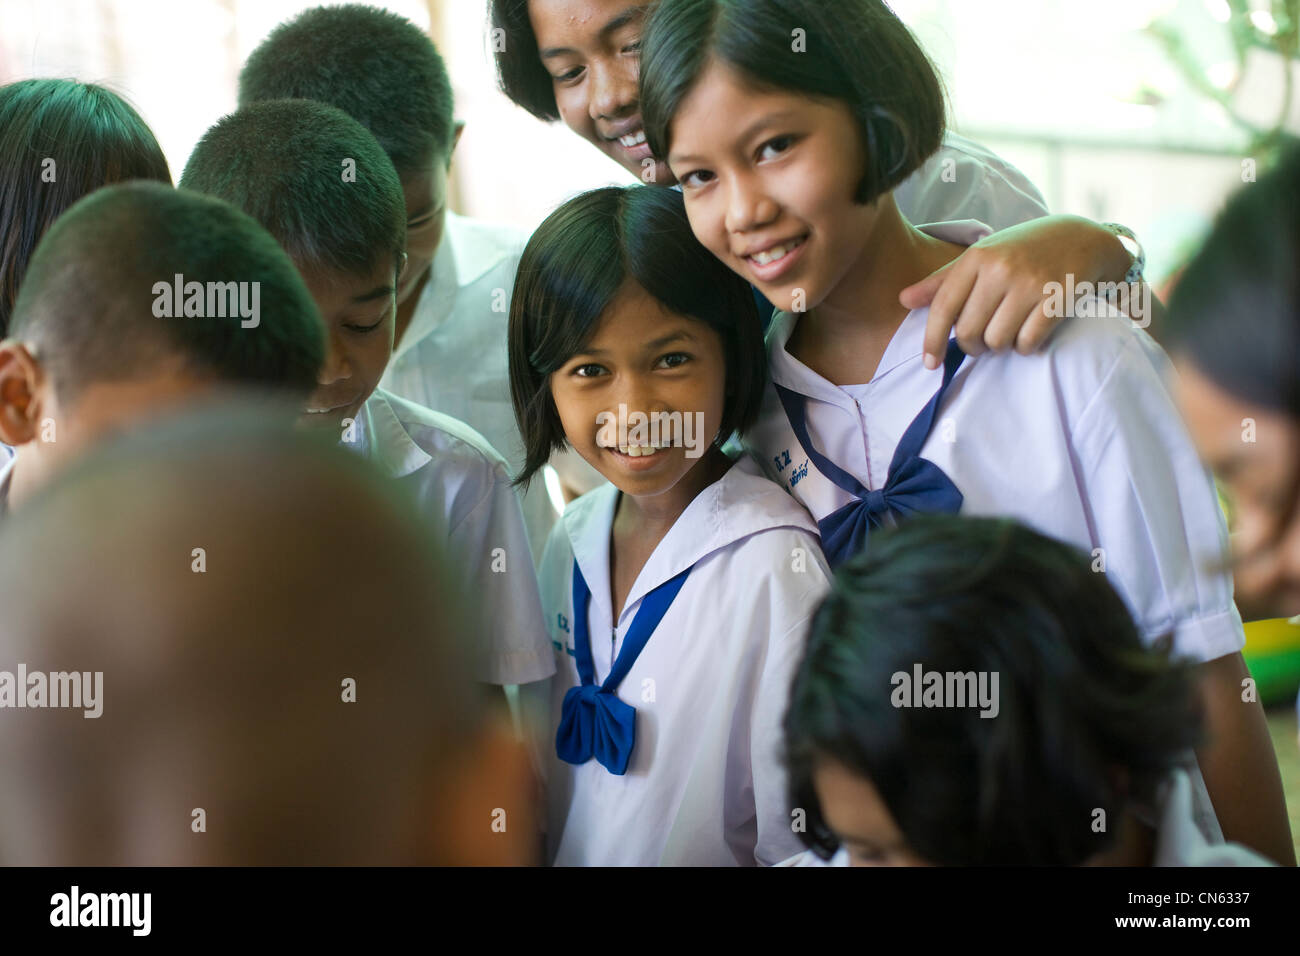 Pupils at a primary school in Songkhla collect rubbish and bring it to school as part of a Waste Management Project. Stock Photo